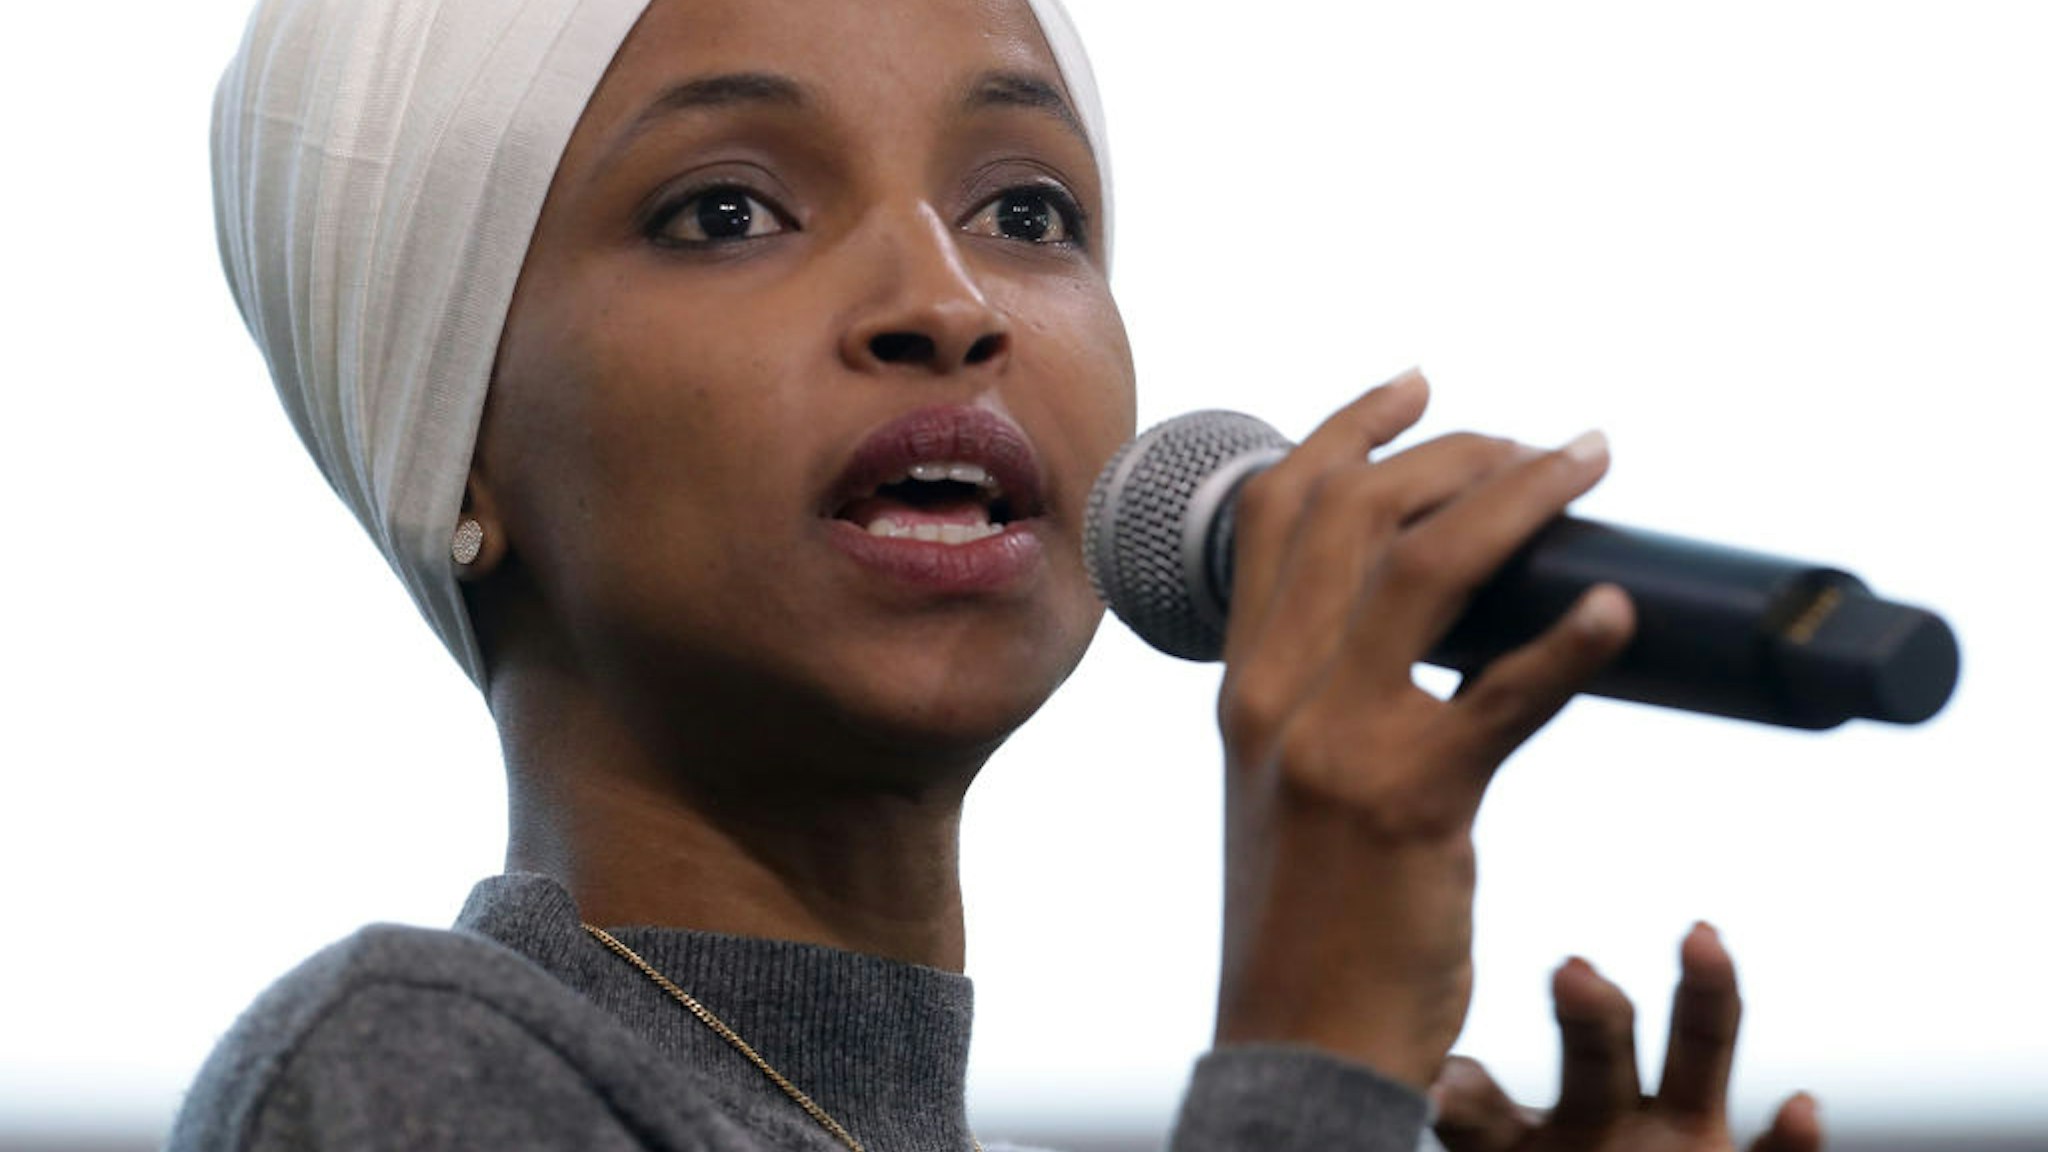 WASHINGTON, DC - JULY 23: Rep. Ilhan Omar (D-MN) participates in a panel discussion during the Muslim Collective For Equitable Democracy Conference and Presidential Forum at the The National Housing Center July 23, 2019 in Washington, DC. As a member of a group of four freshman Democratic women of color, known informally as 'The Squad,' Omar has been targeted by President Donald Trump with controversial Tweets during the last week. (Photo by Chip Somodevilla/Getty Images)